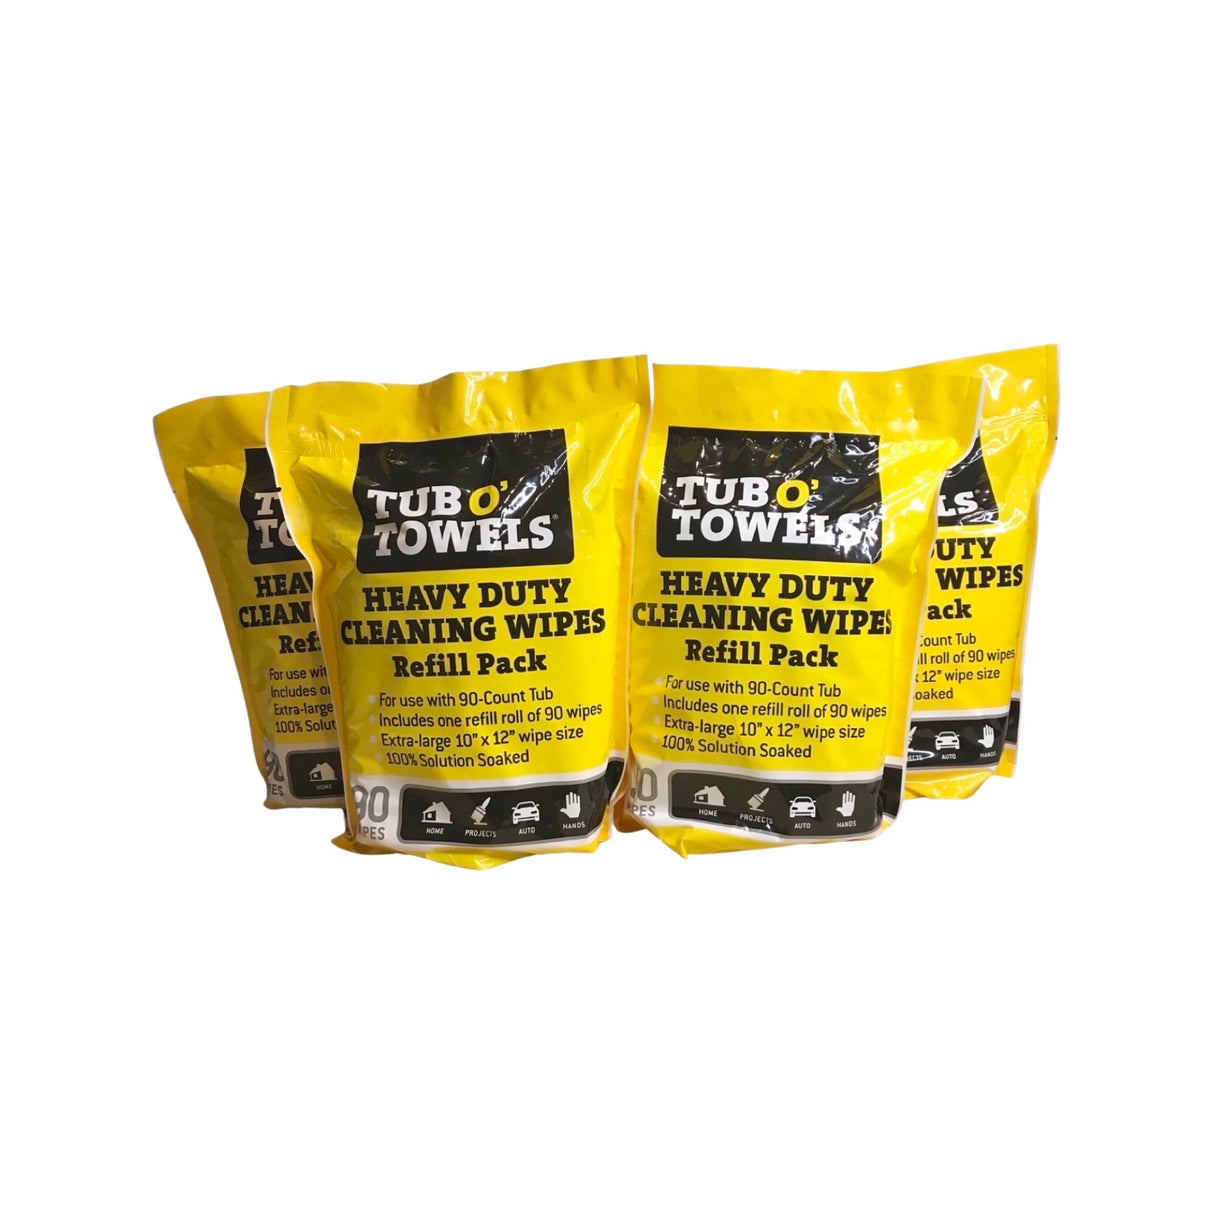 Tub O' Towels TW90-P - 4 Pack Heavy Duty Extra Large 10" x 12" Cleaning Wipes Refill